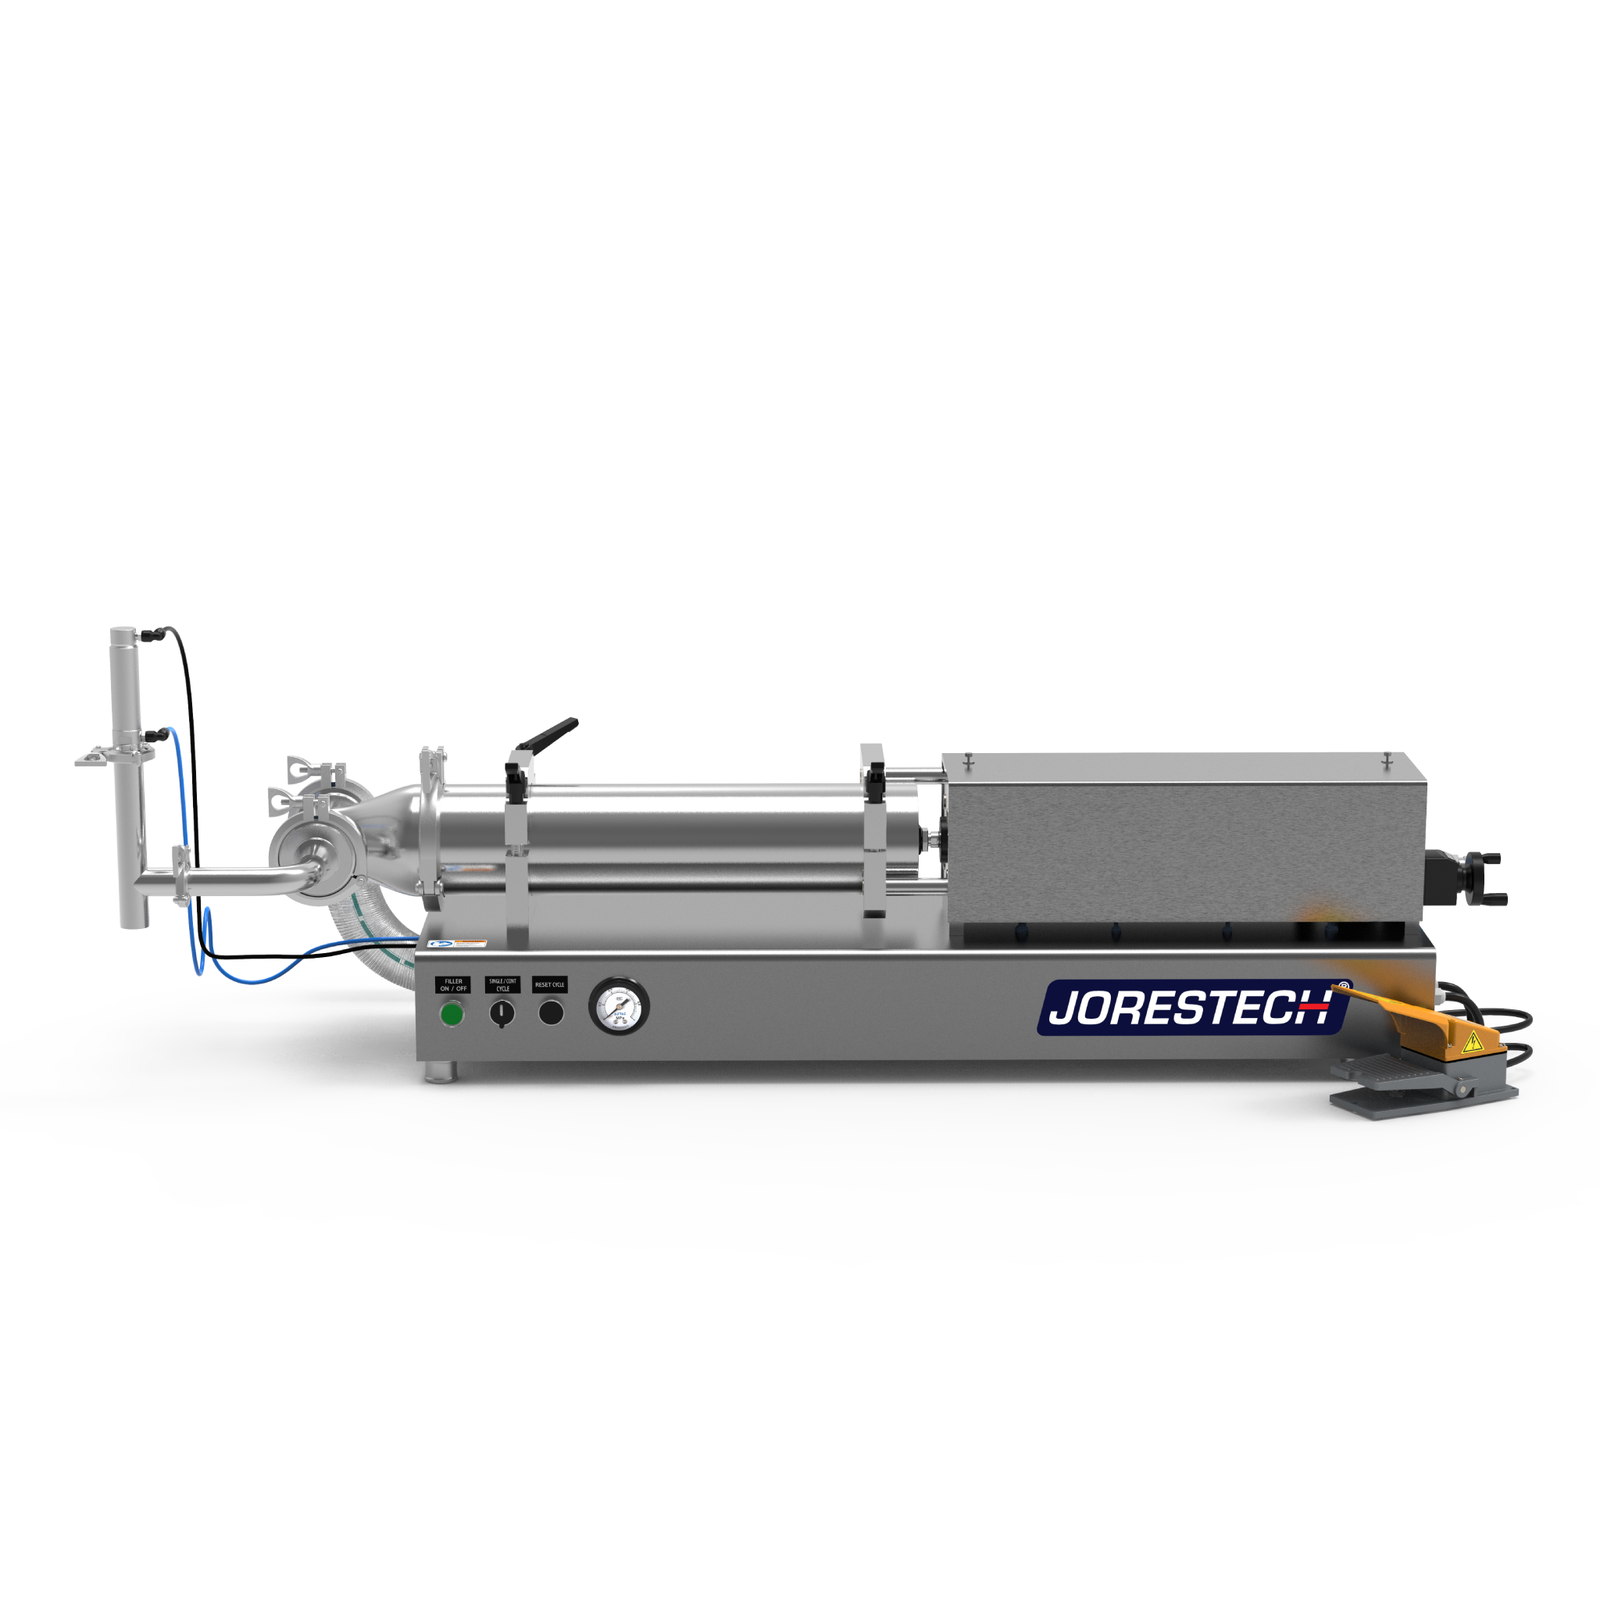 Low viscosity Jorestech piston filling machine in a frontal. The piston filler is made out of stainless steel and there's a yellow and grey foot pedal resting on the side.